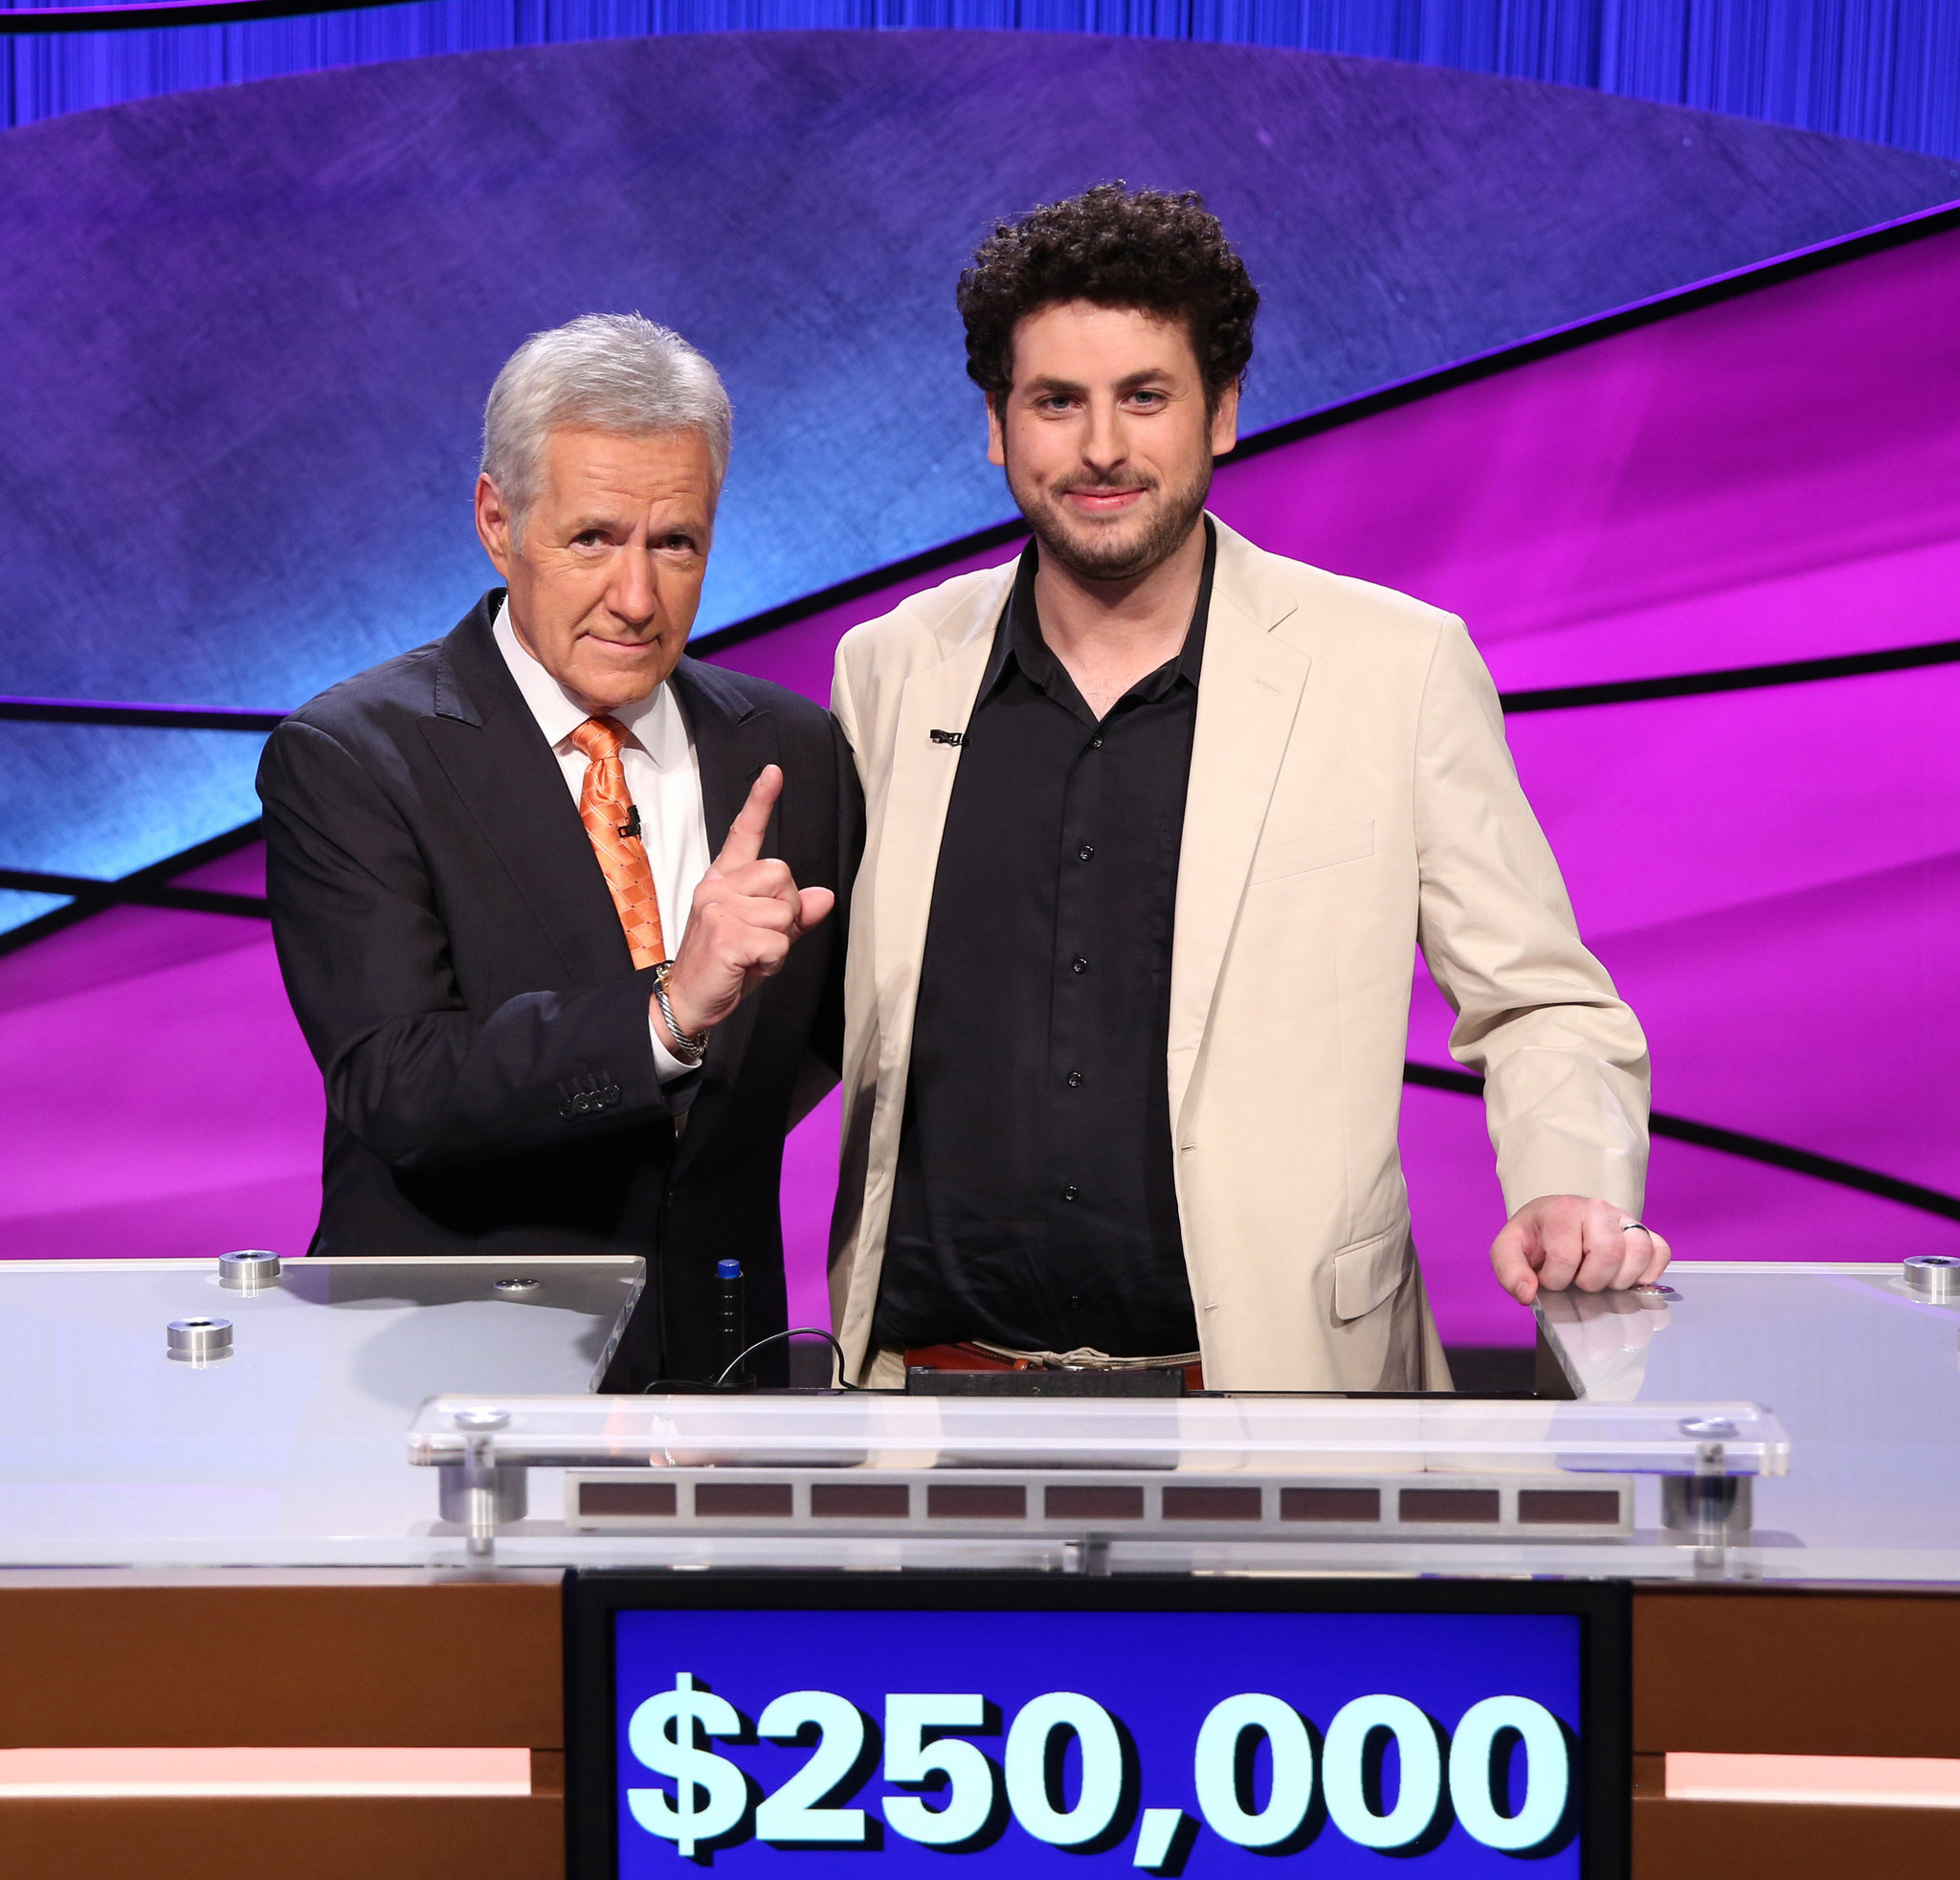 'Jeopardy!' crowns 'Tournament of Champions' winner, who earns payout